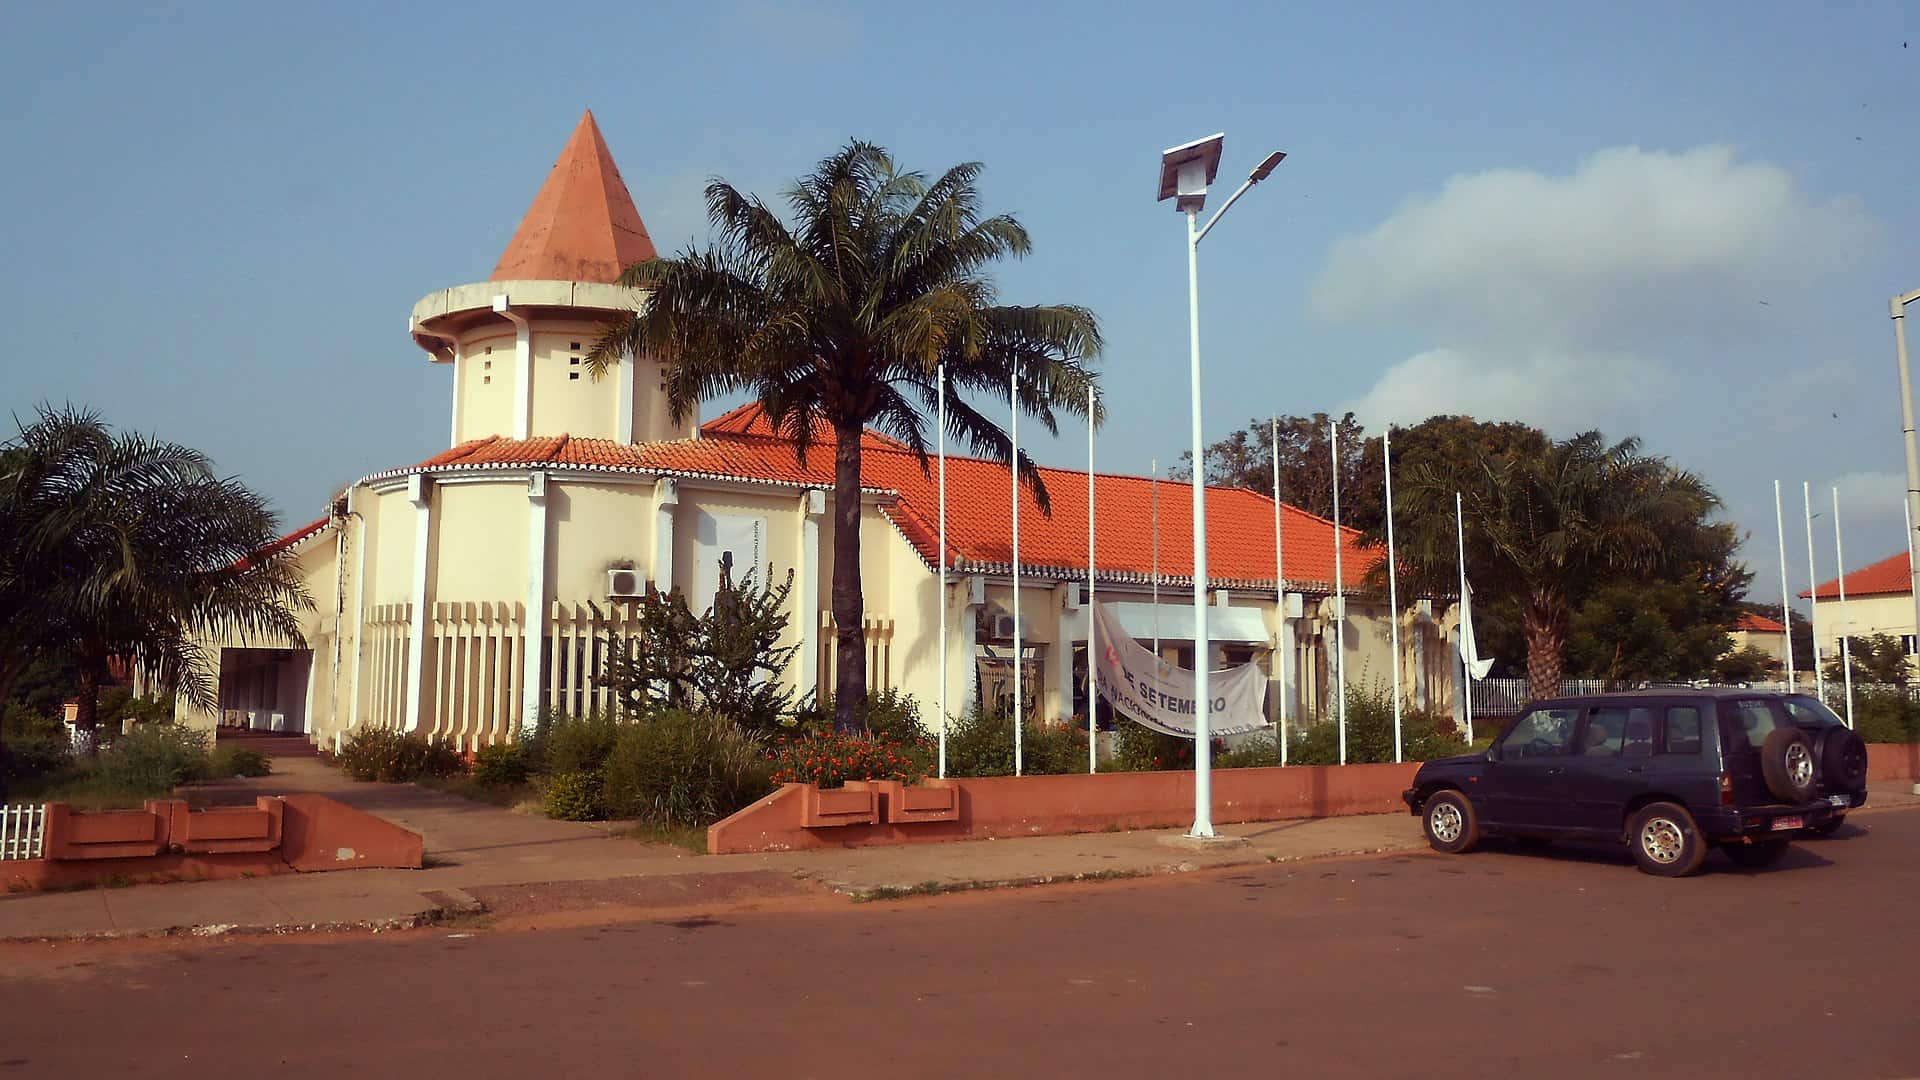 National museum of Guinea-Bissau - National Ethnographic Museum